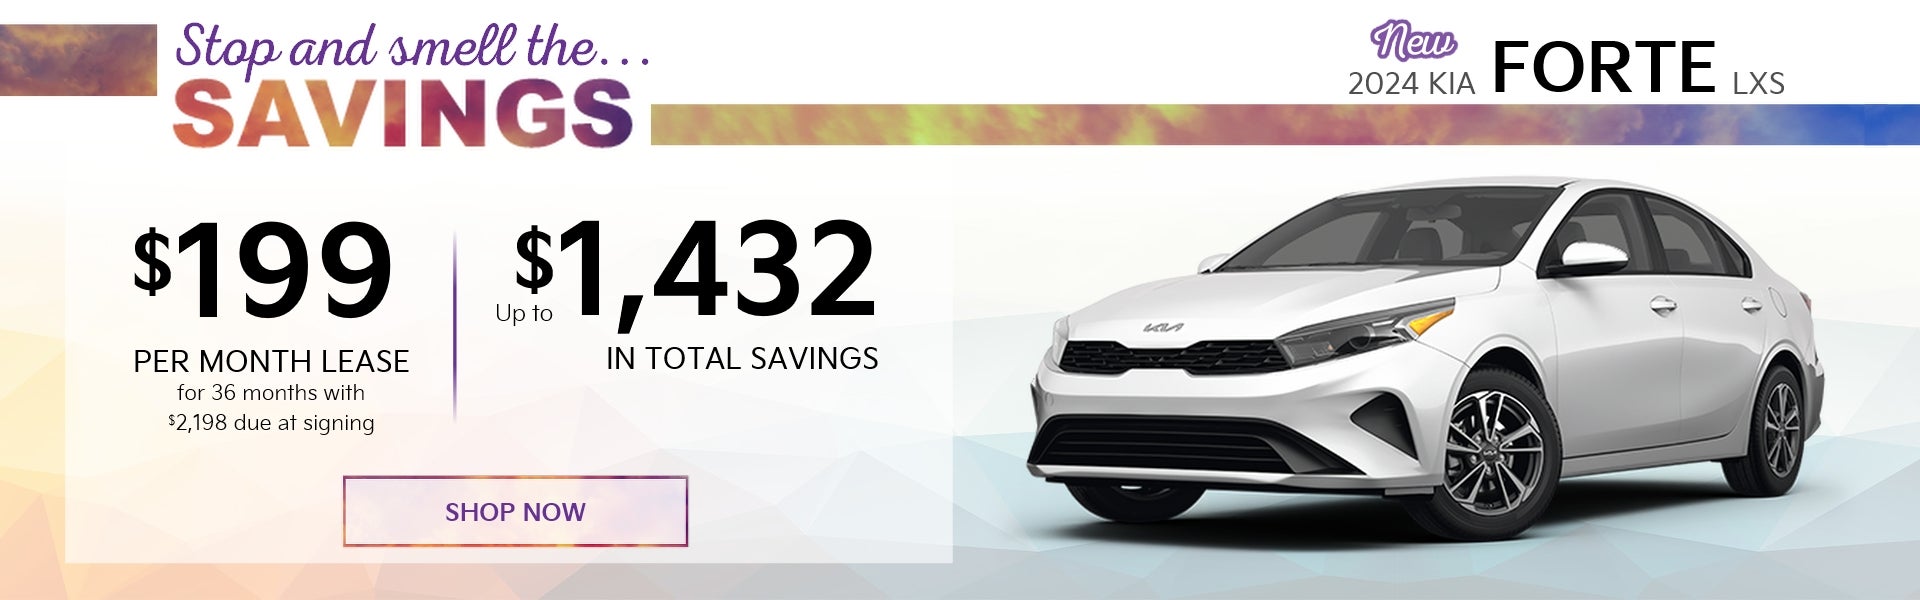 Stop and smell the savings on a new 2024 Kia Forte LXS!